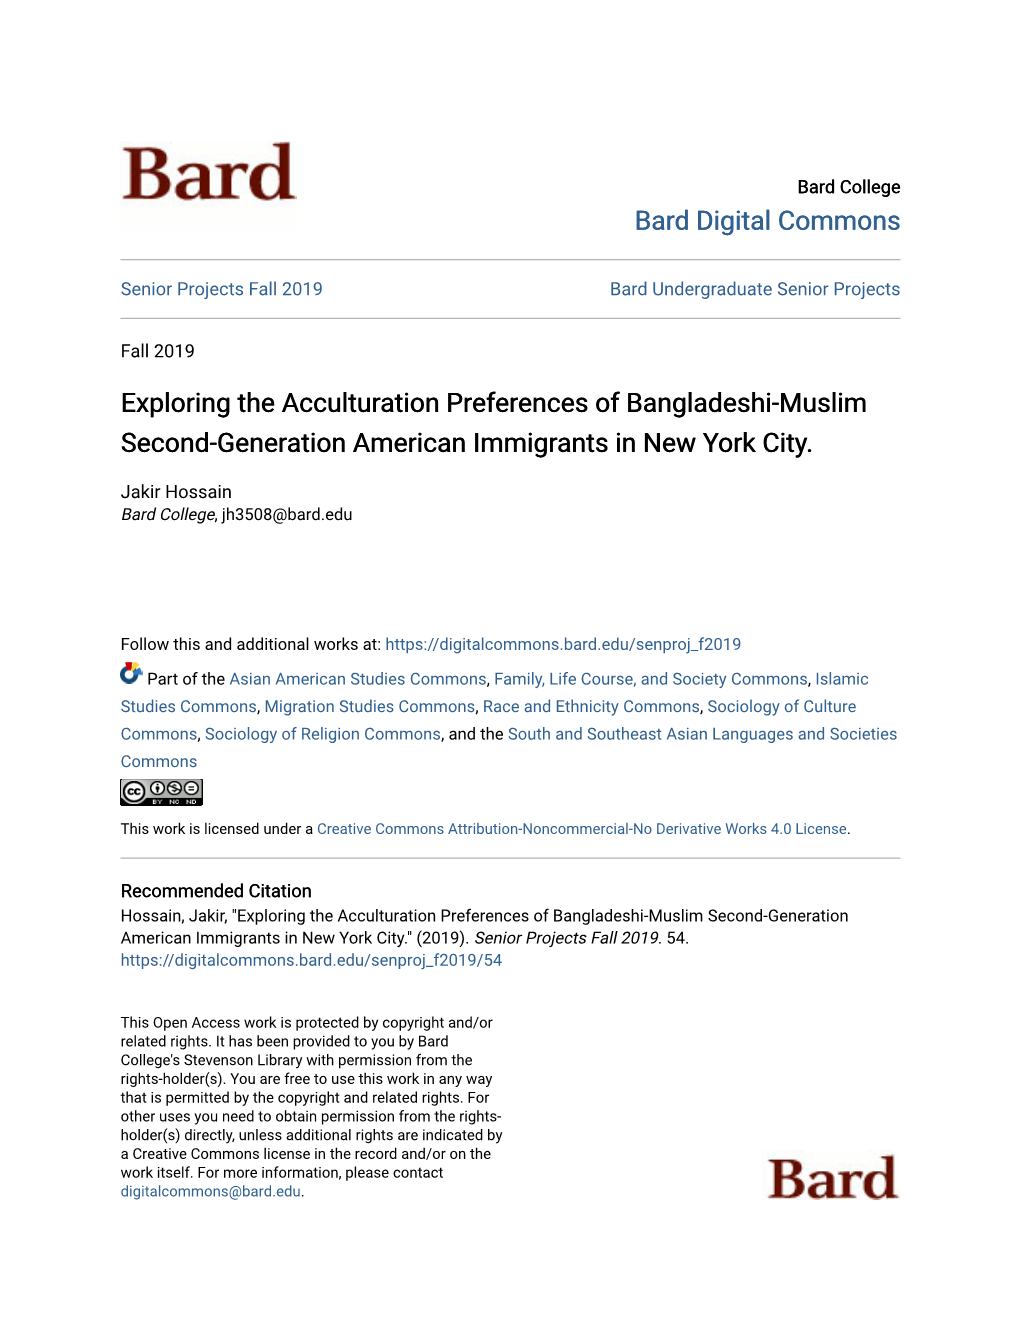 Exploring the Acculturation Preferences of Bangladeshi-Muslim Second-Generation American Immigrants in New York City